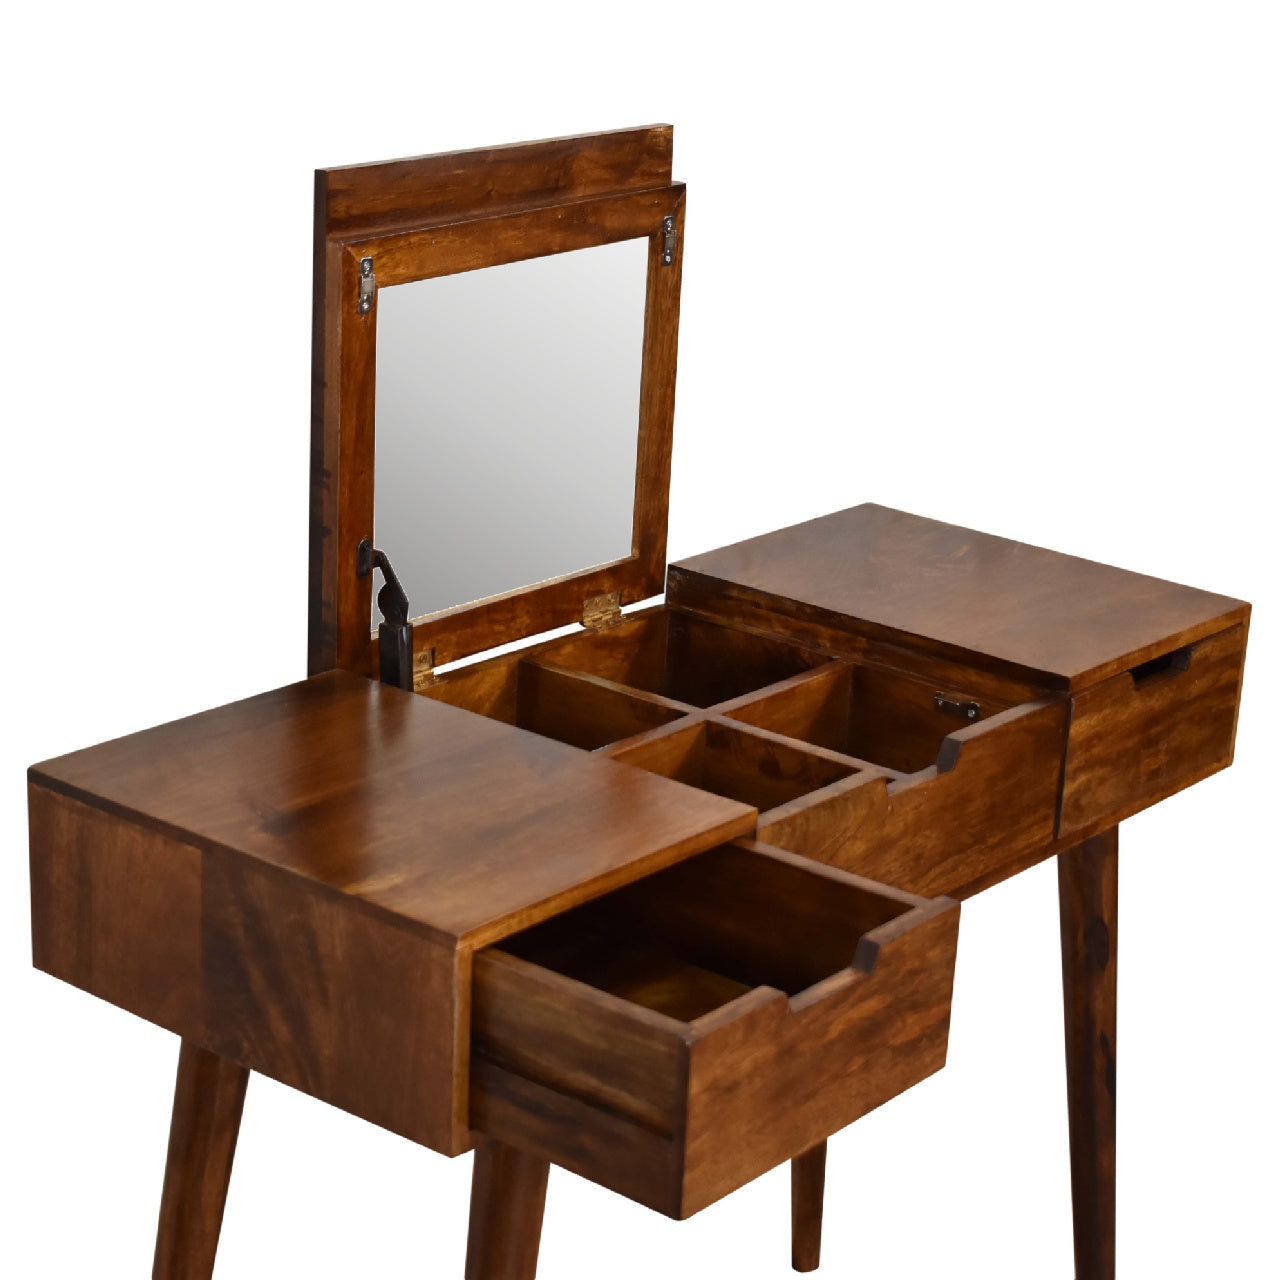 Chestnut Dressing Table with Foldable Mirror - Square - IN3316-1